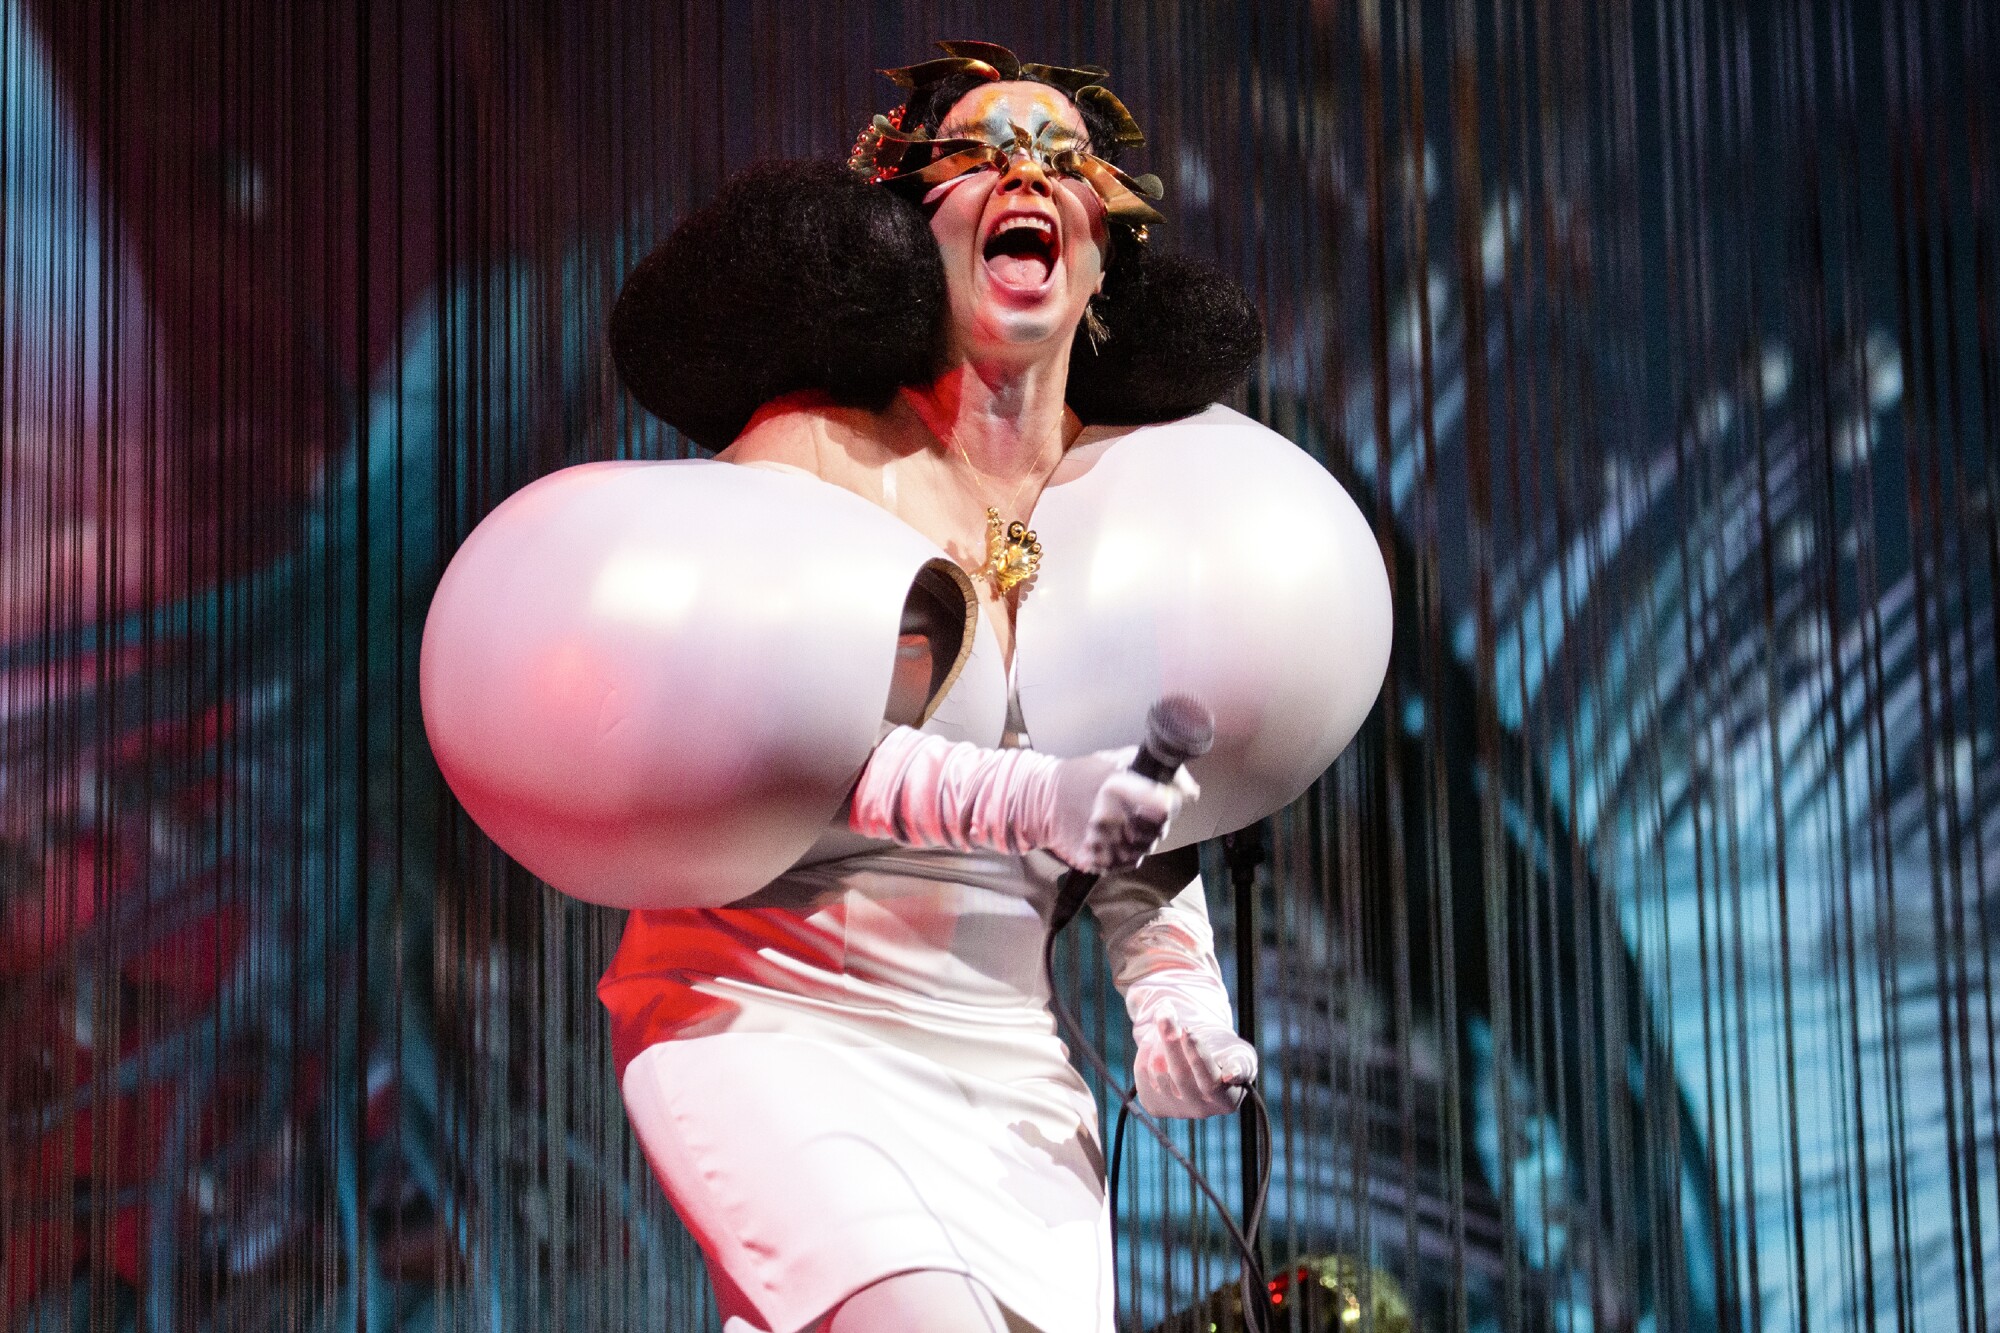 A woman performs on stage in a white inflatable dress.